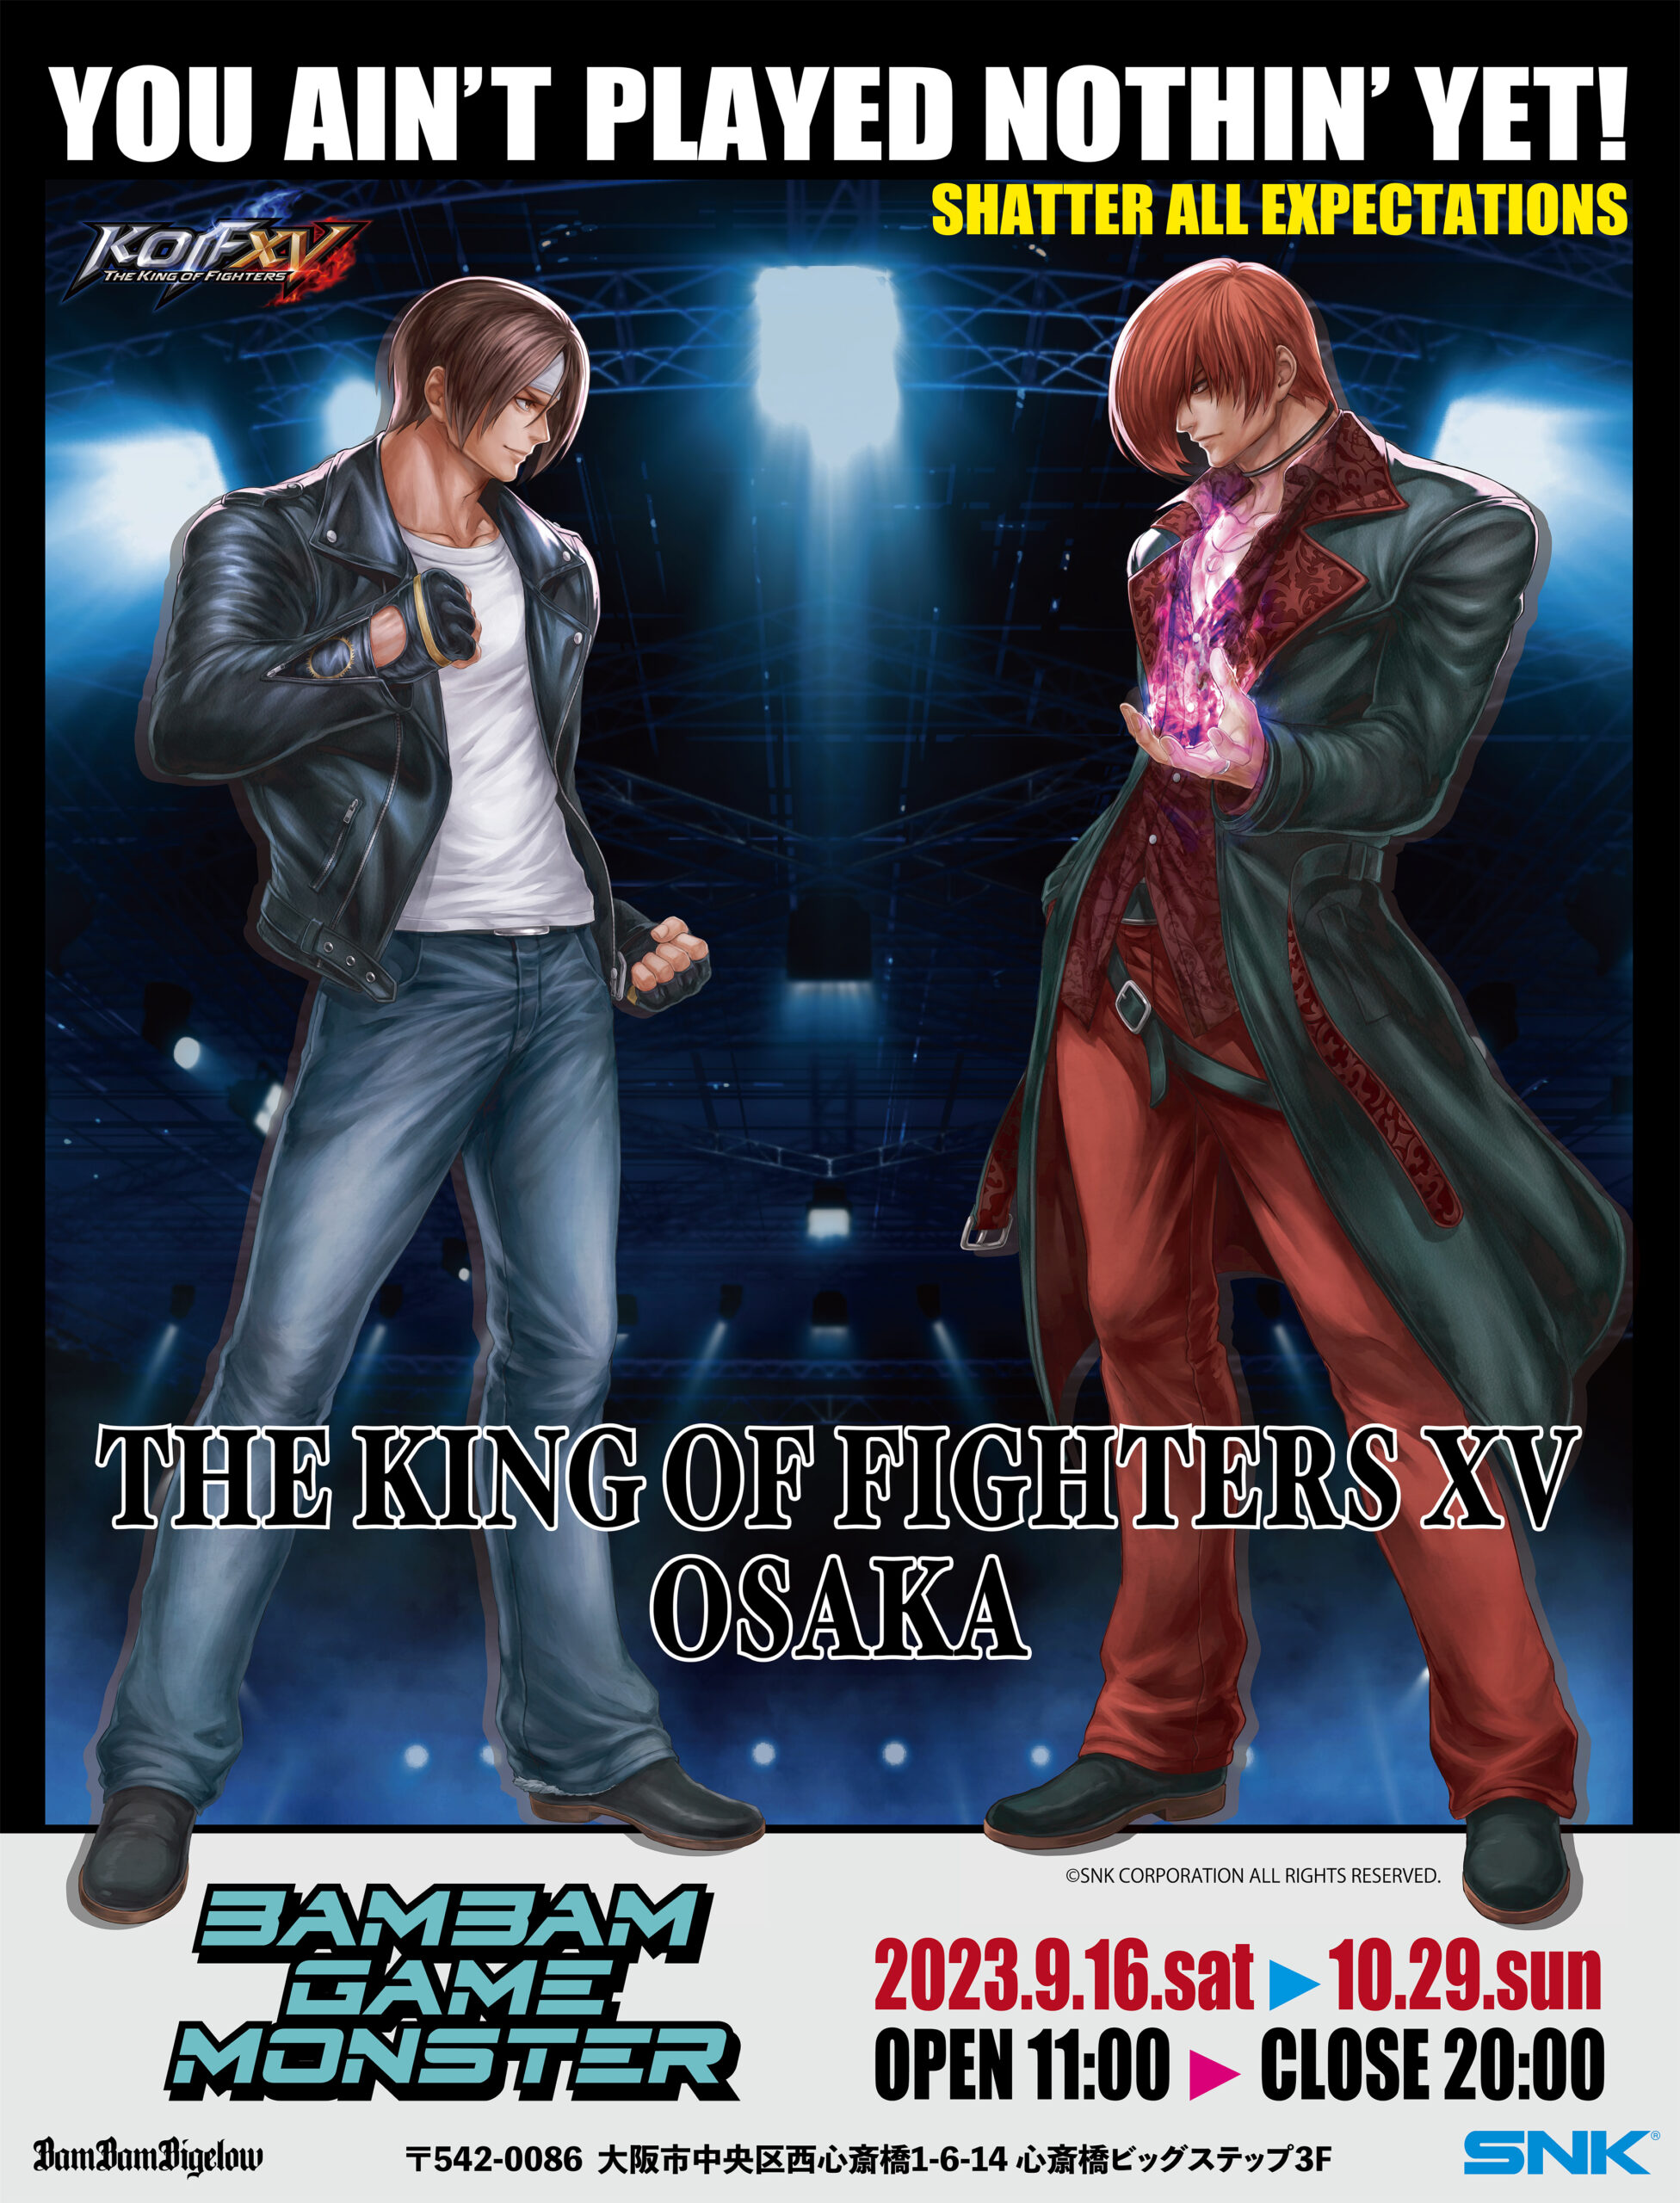 THE KING OF FIGHTERS XV OSAKA